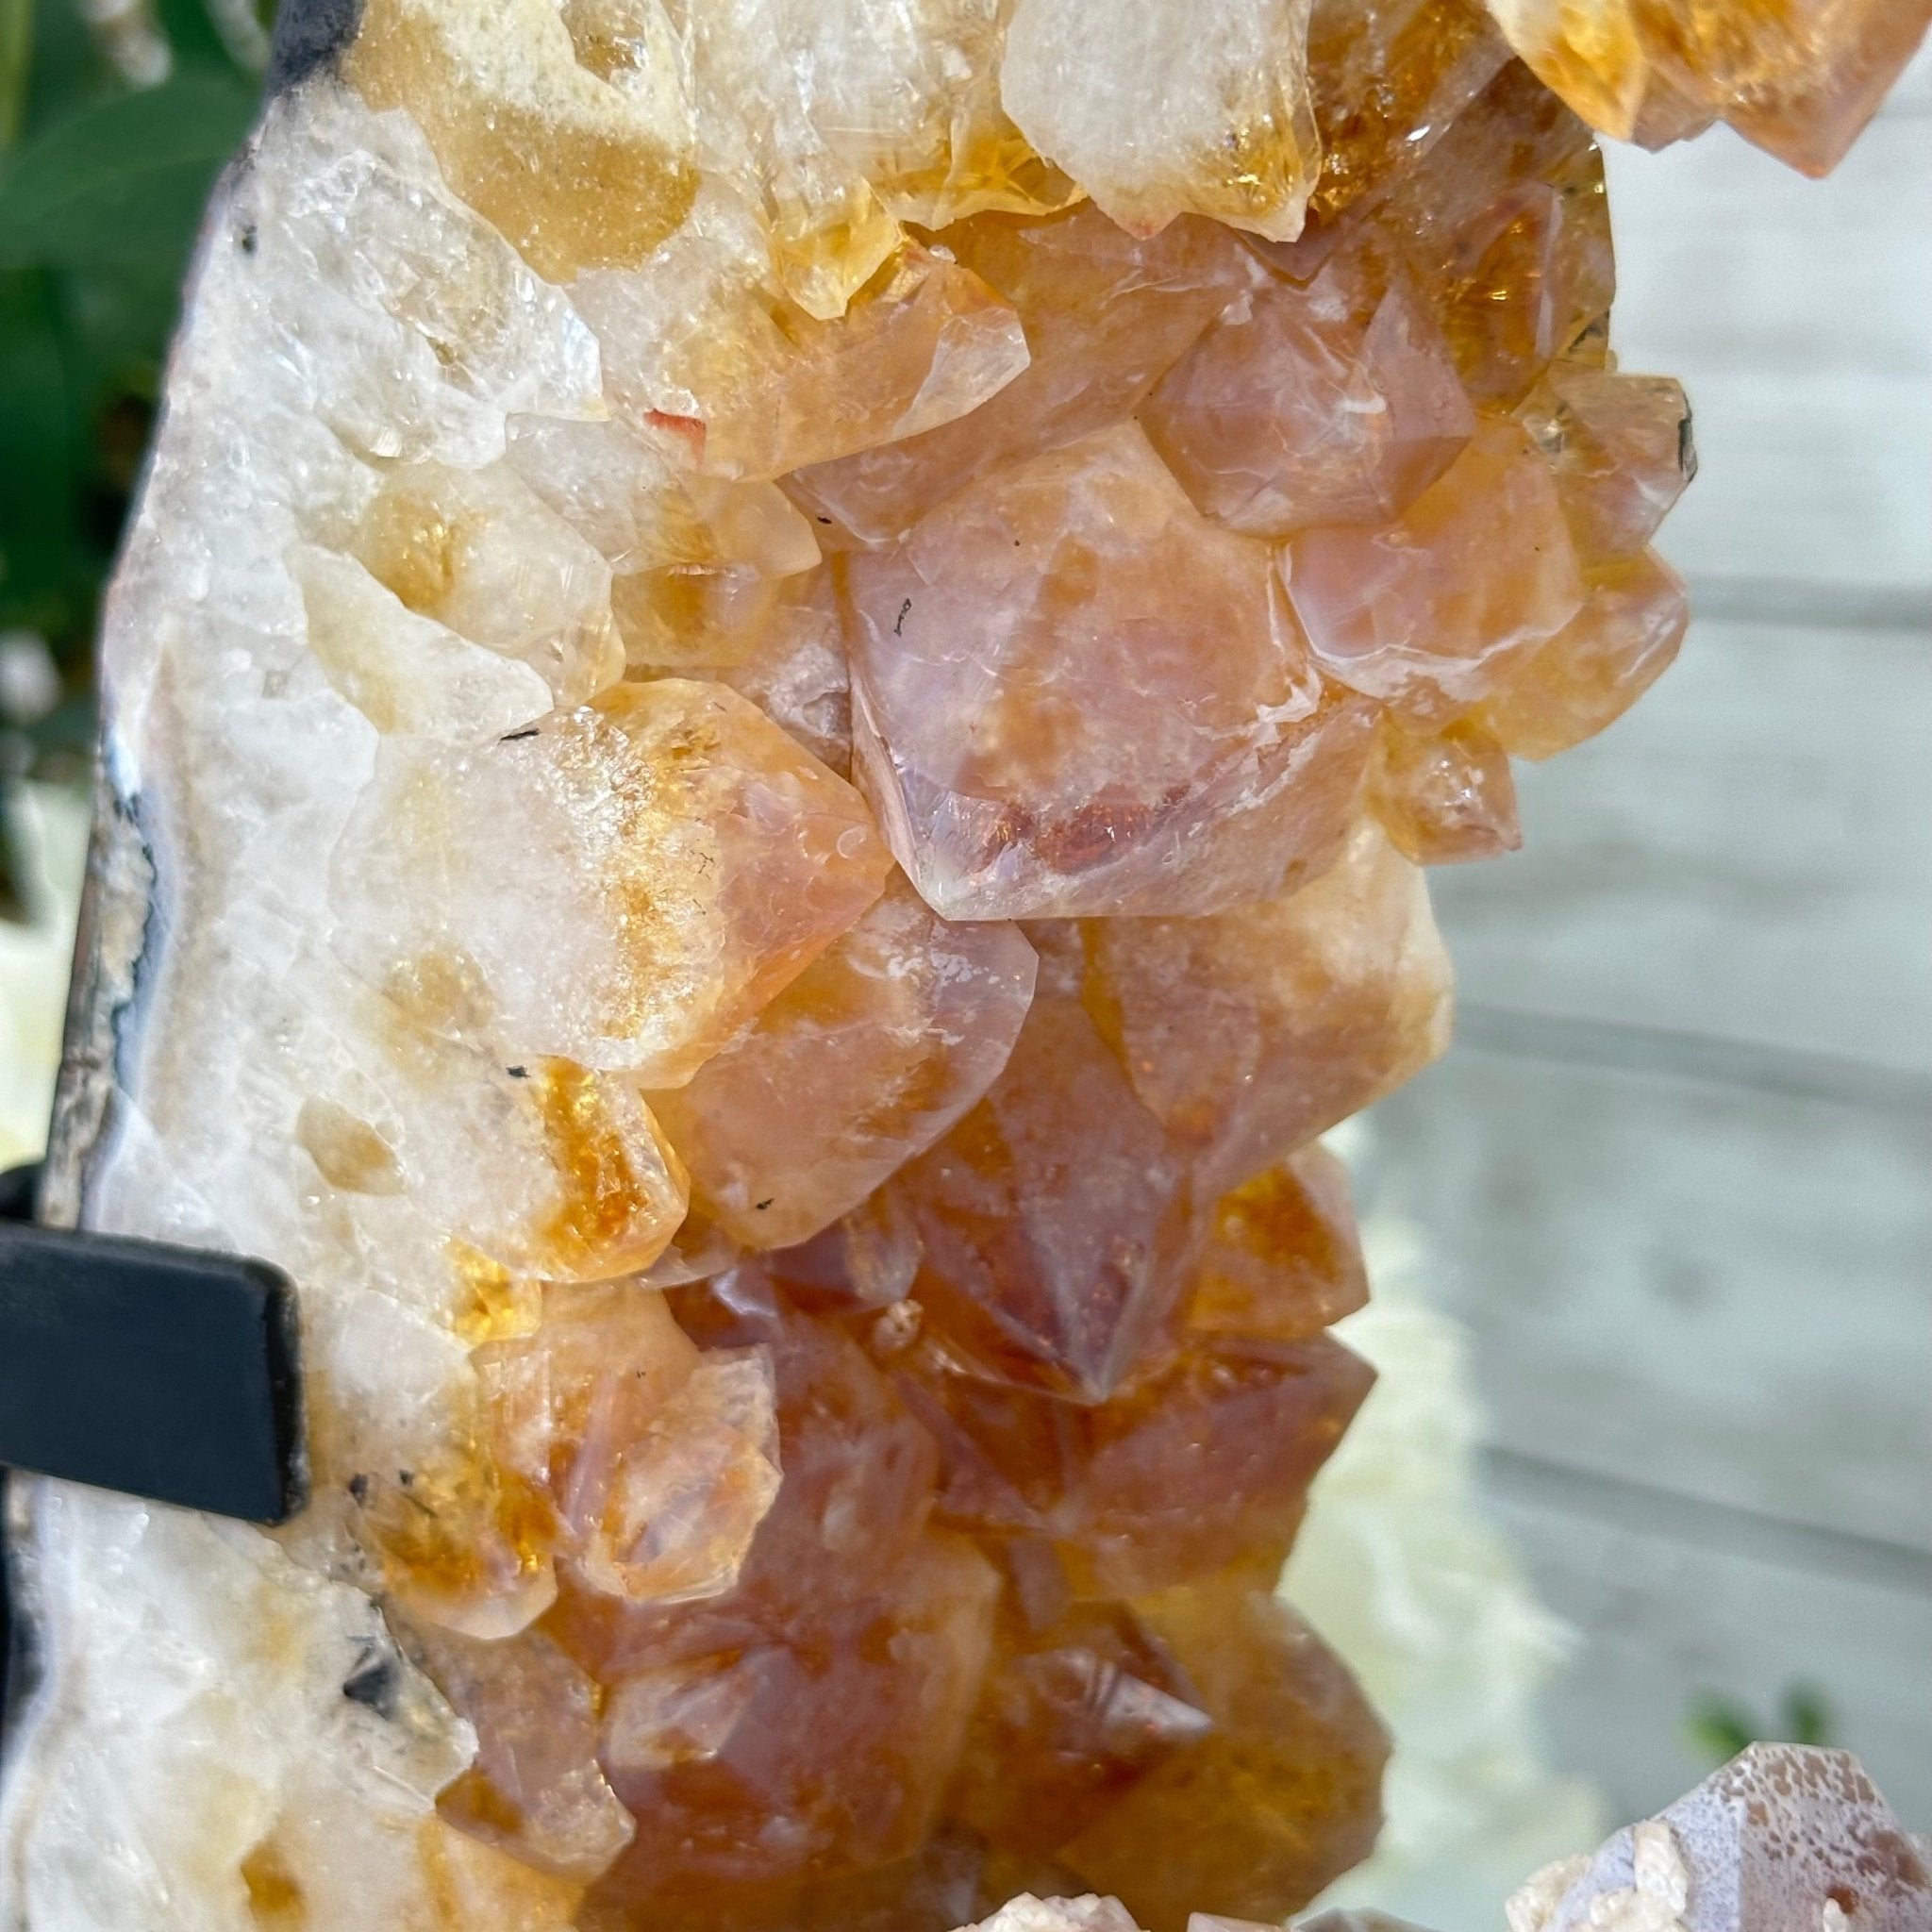 Citrine Portal on a Rotating Stand, 28.8 lbs & 18.3" tall #5625-0008 by Brazil Gems® - Brazil GemsBrazil GemsCitrine Portal on a Rotating Stand, 28.8 lbs & 18.3" tall #5625-0008 by Brazil Gems®Portals on Rotating Bases5625-0008